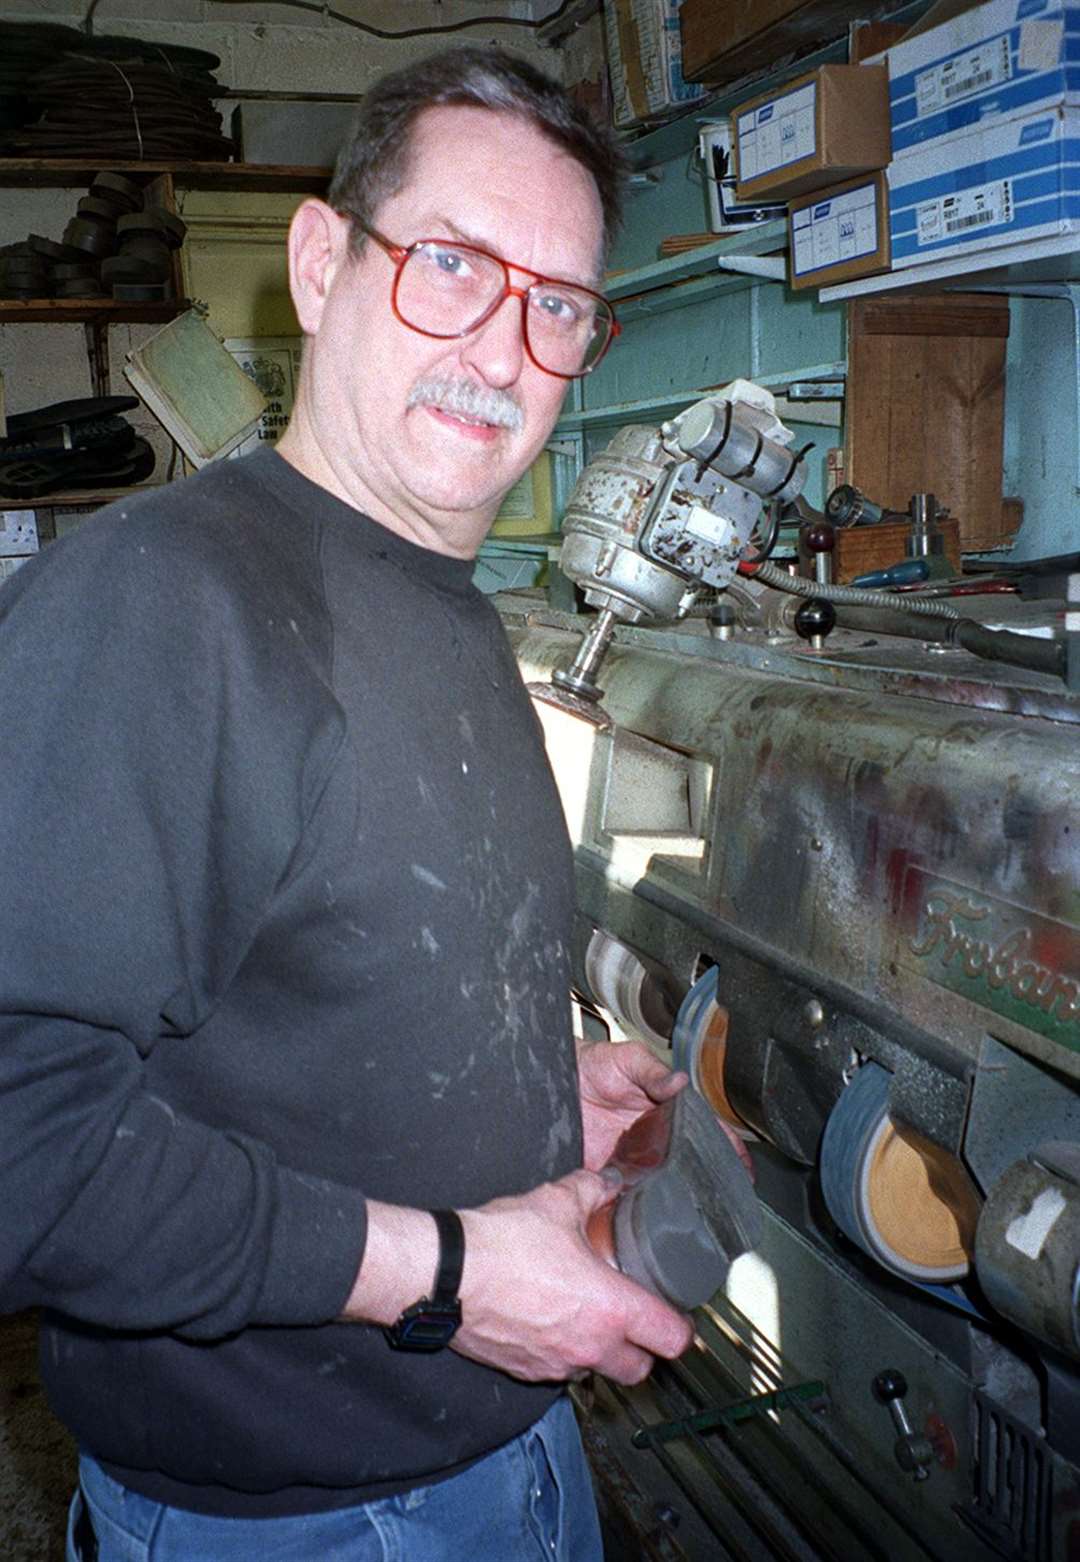 Peter Earl repairs a shoe in March 2002